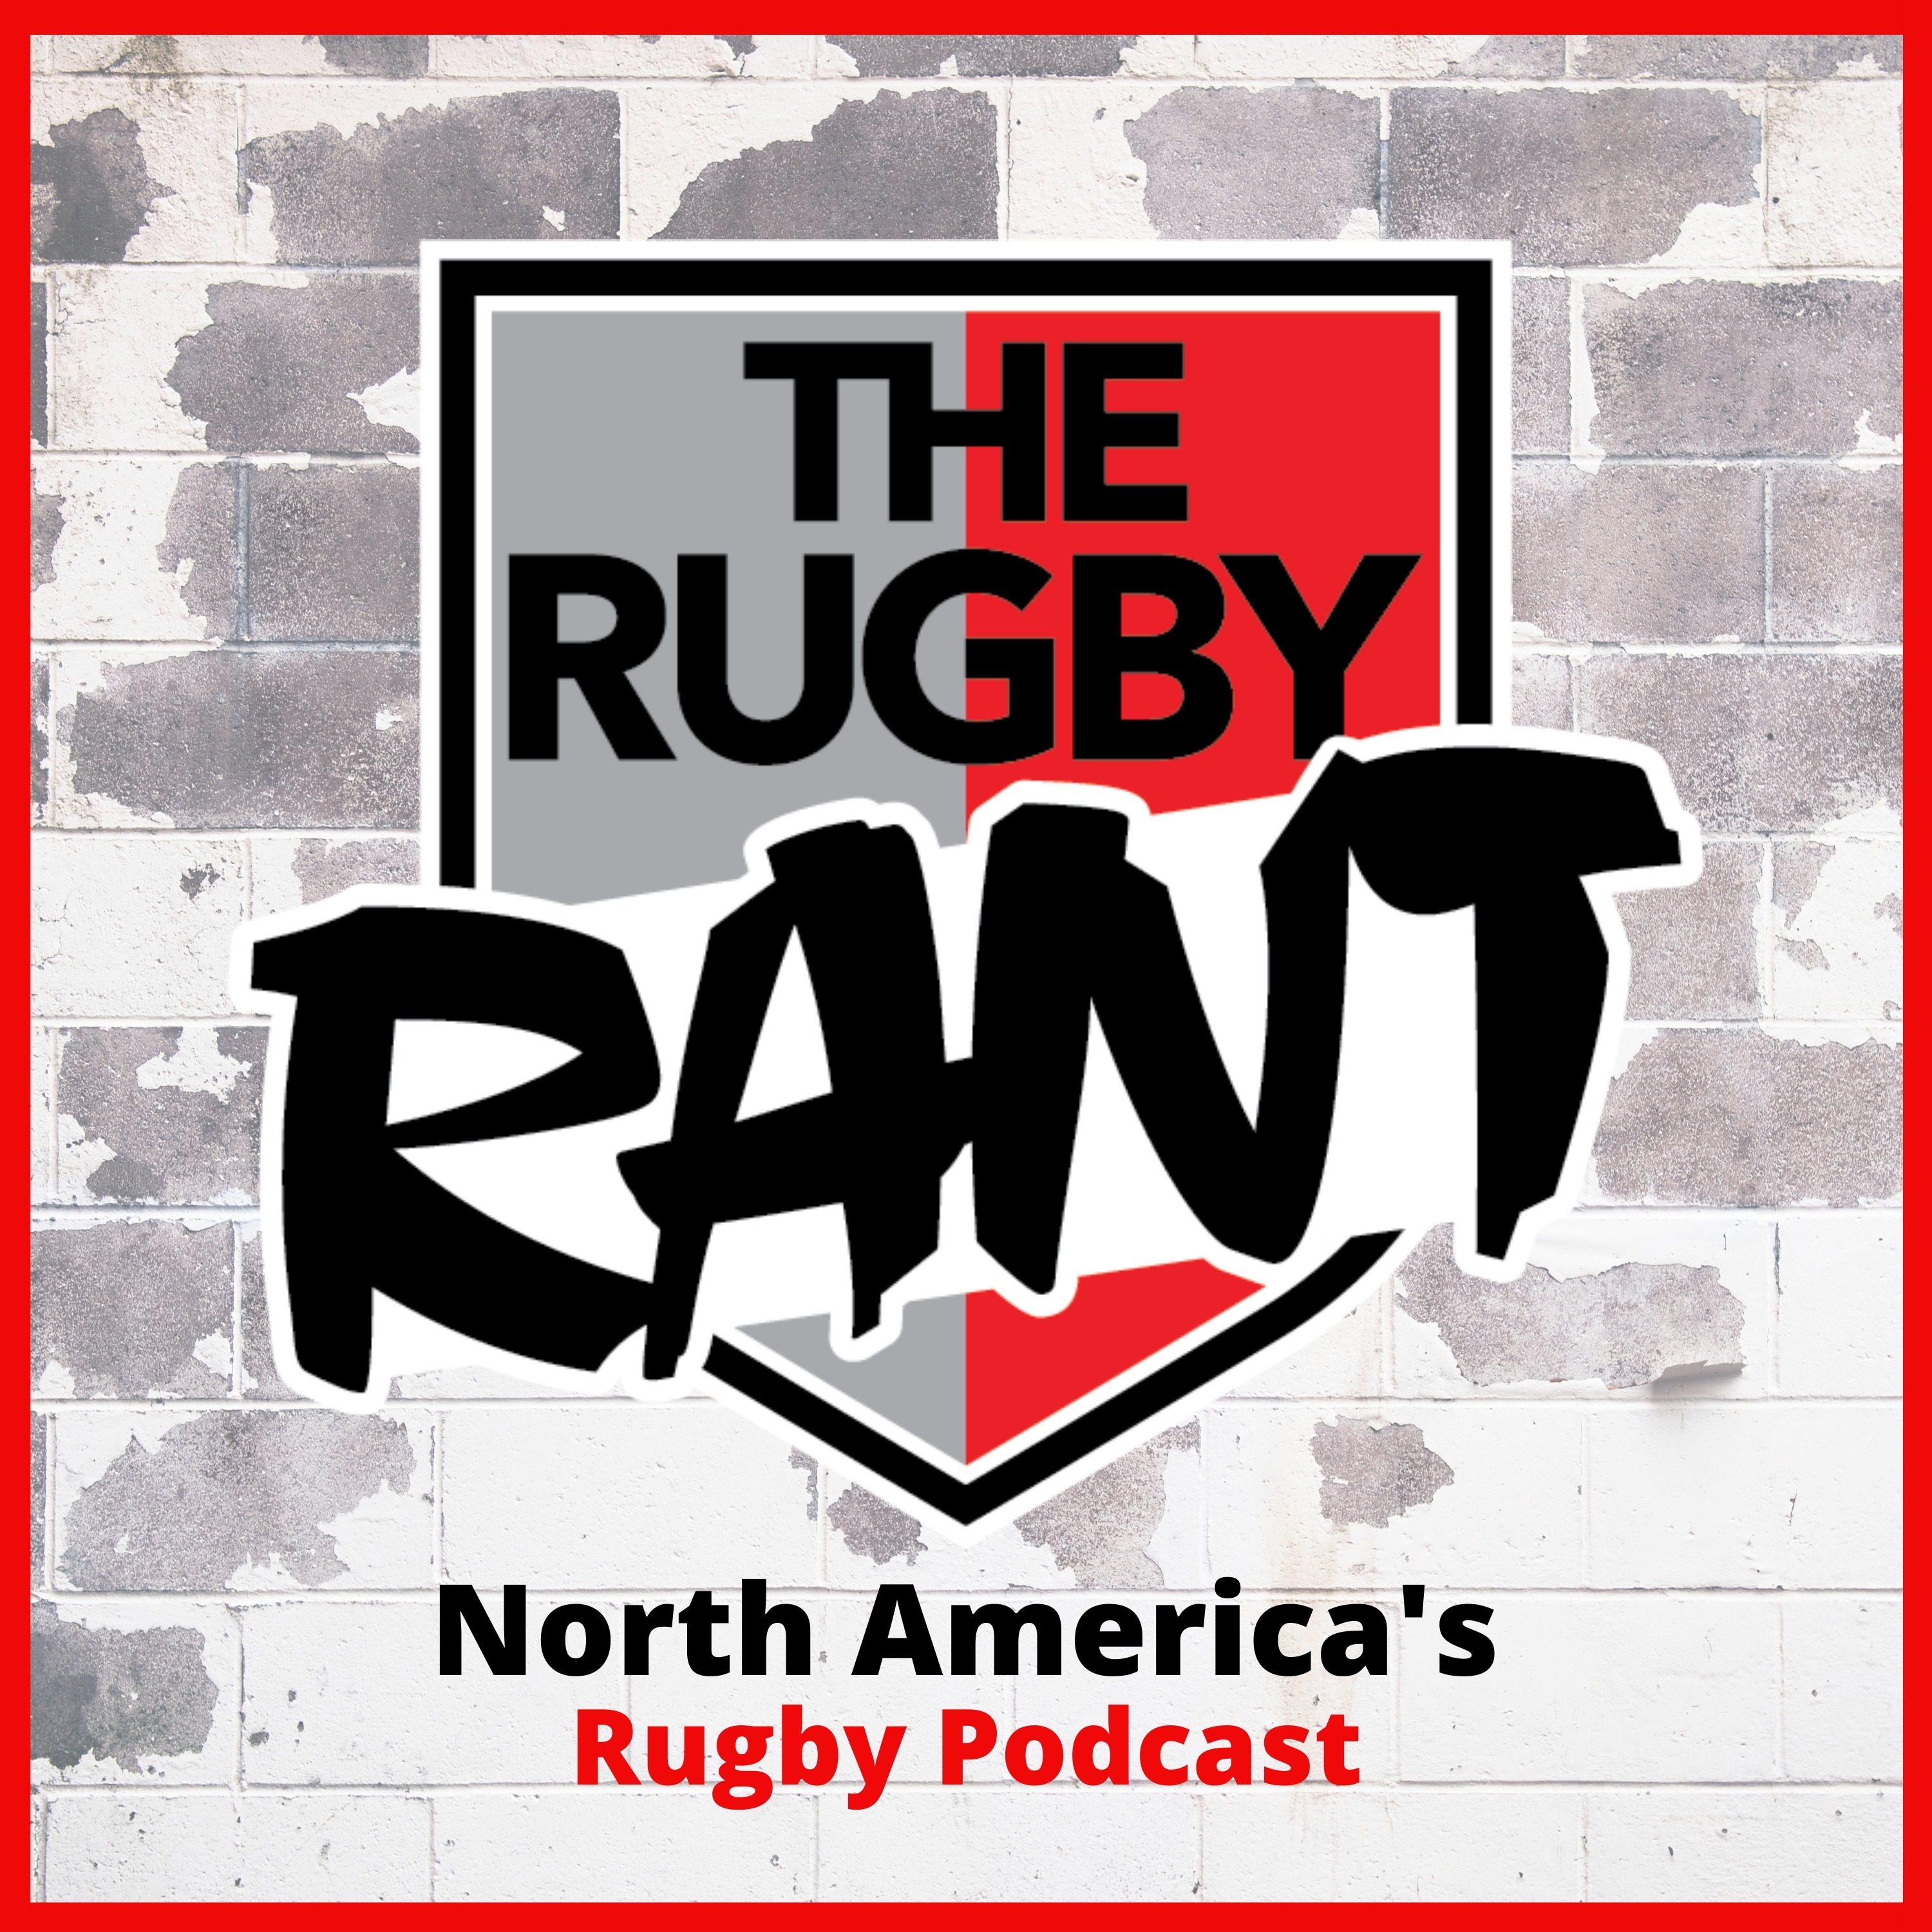 The Rugby Rant - Run, Pass or Kick with Chris Dunlavey & Paul Sheehy